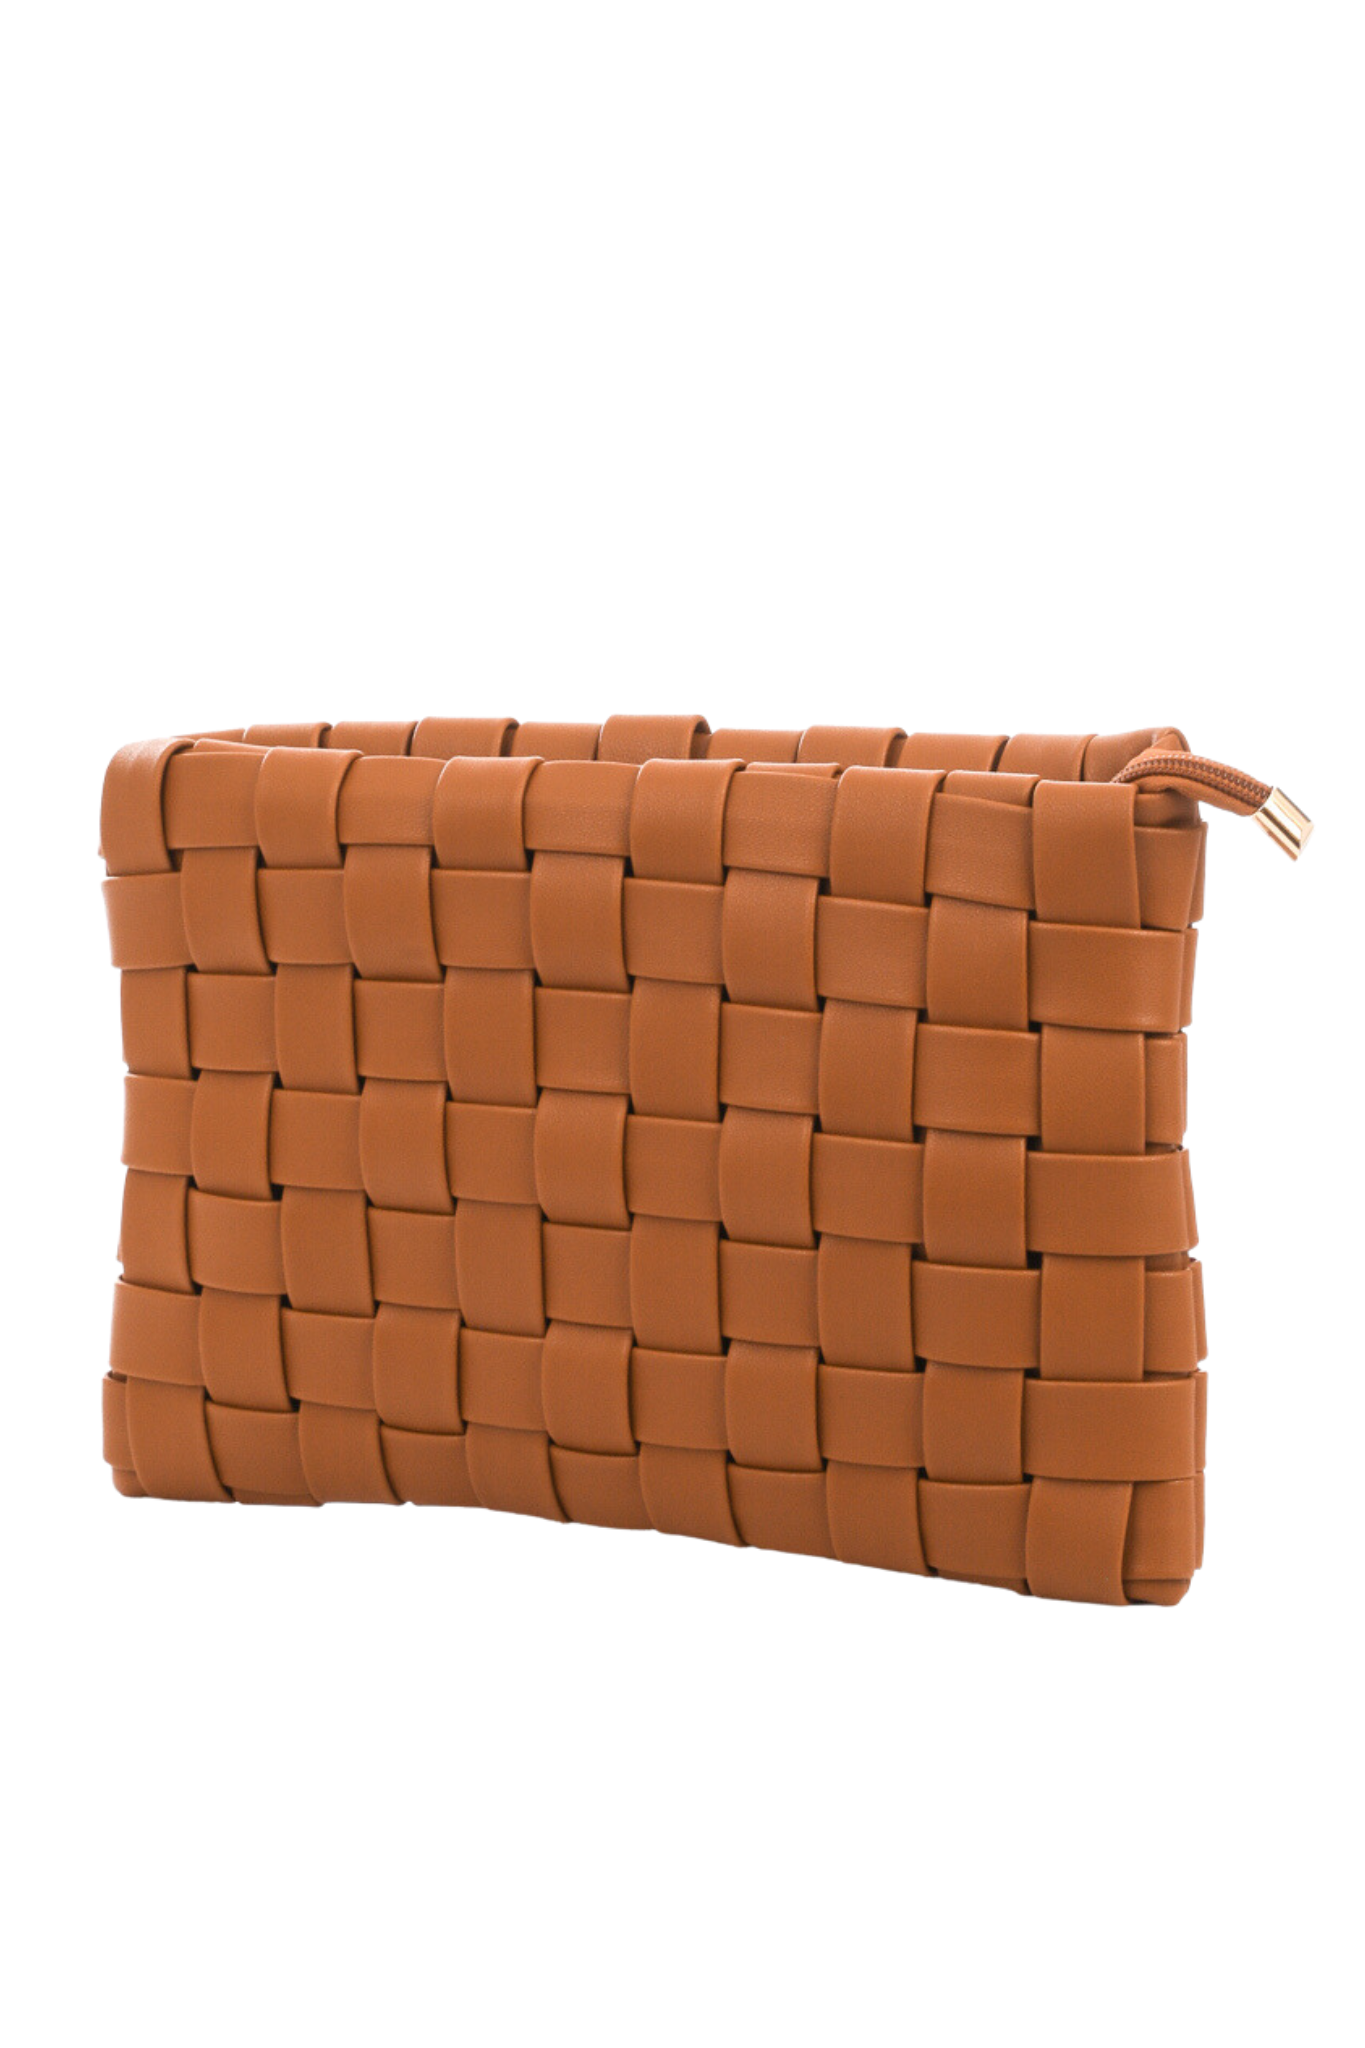 View 1 of Keen Woven Clutch in Brown, a Bags from Larrea Cove. Detail: The Keen Woven Clutch in Brown is a stylish and practical accessory that ...